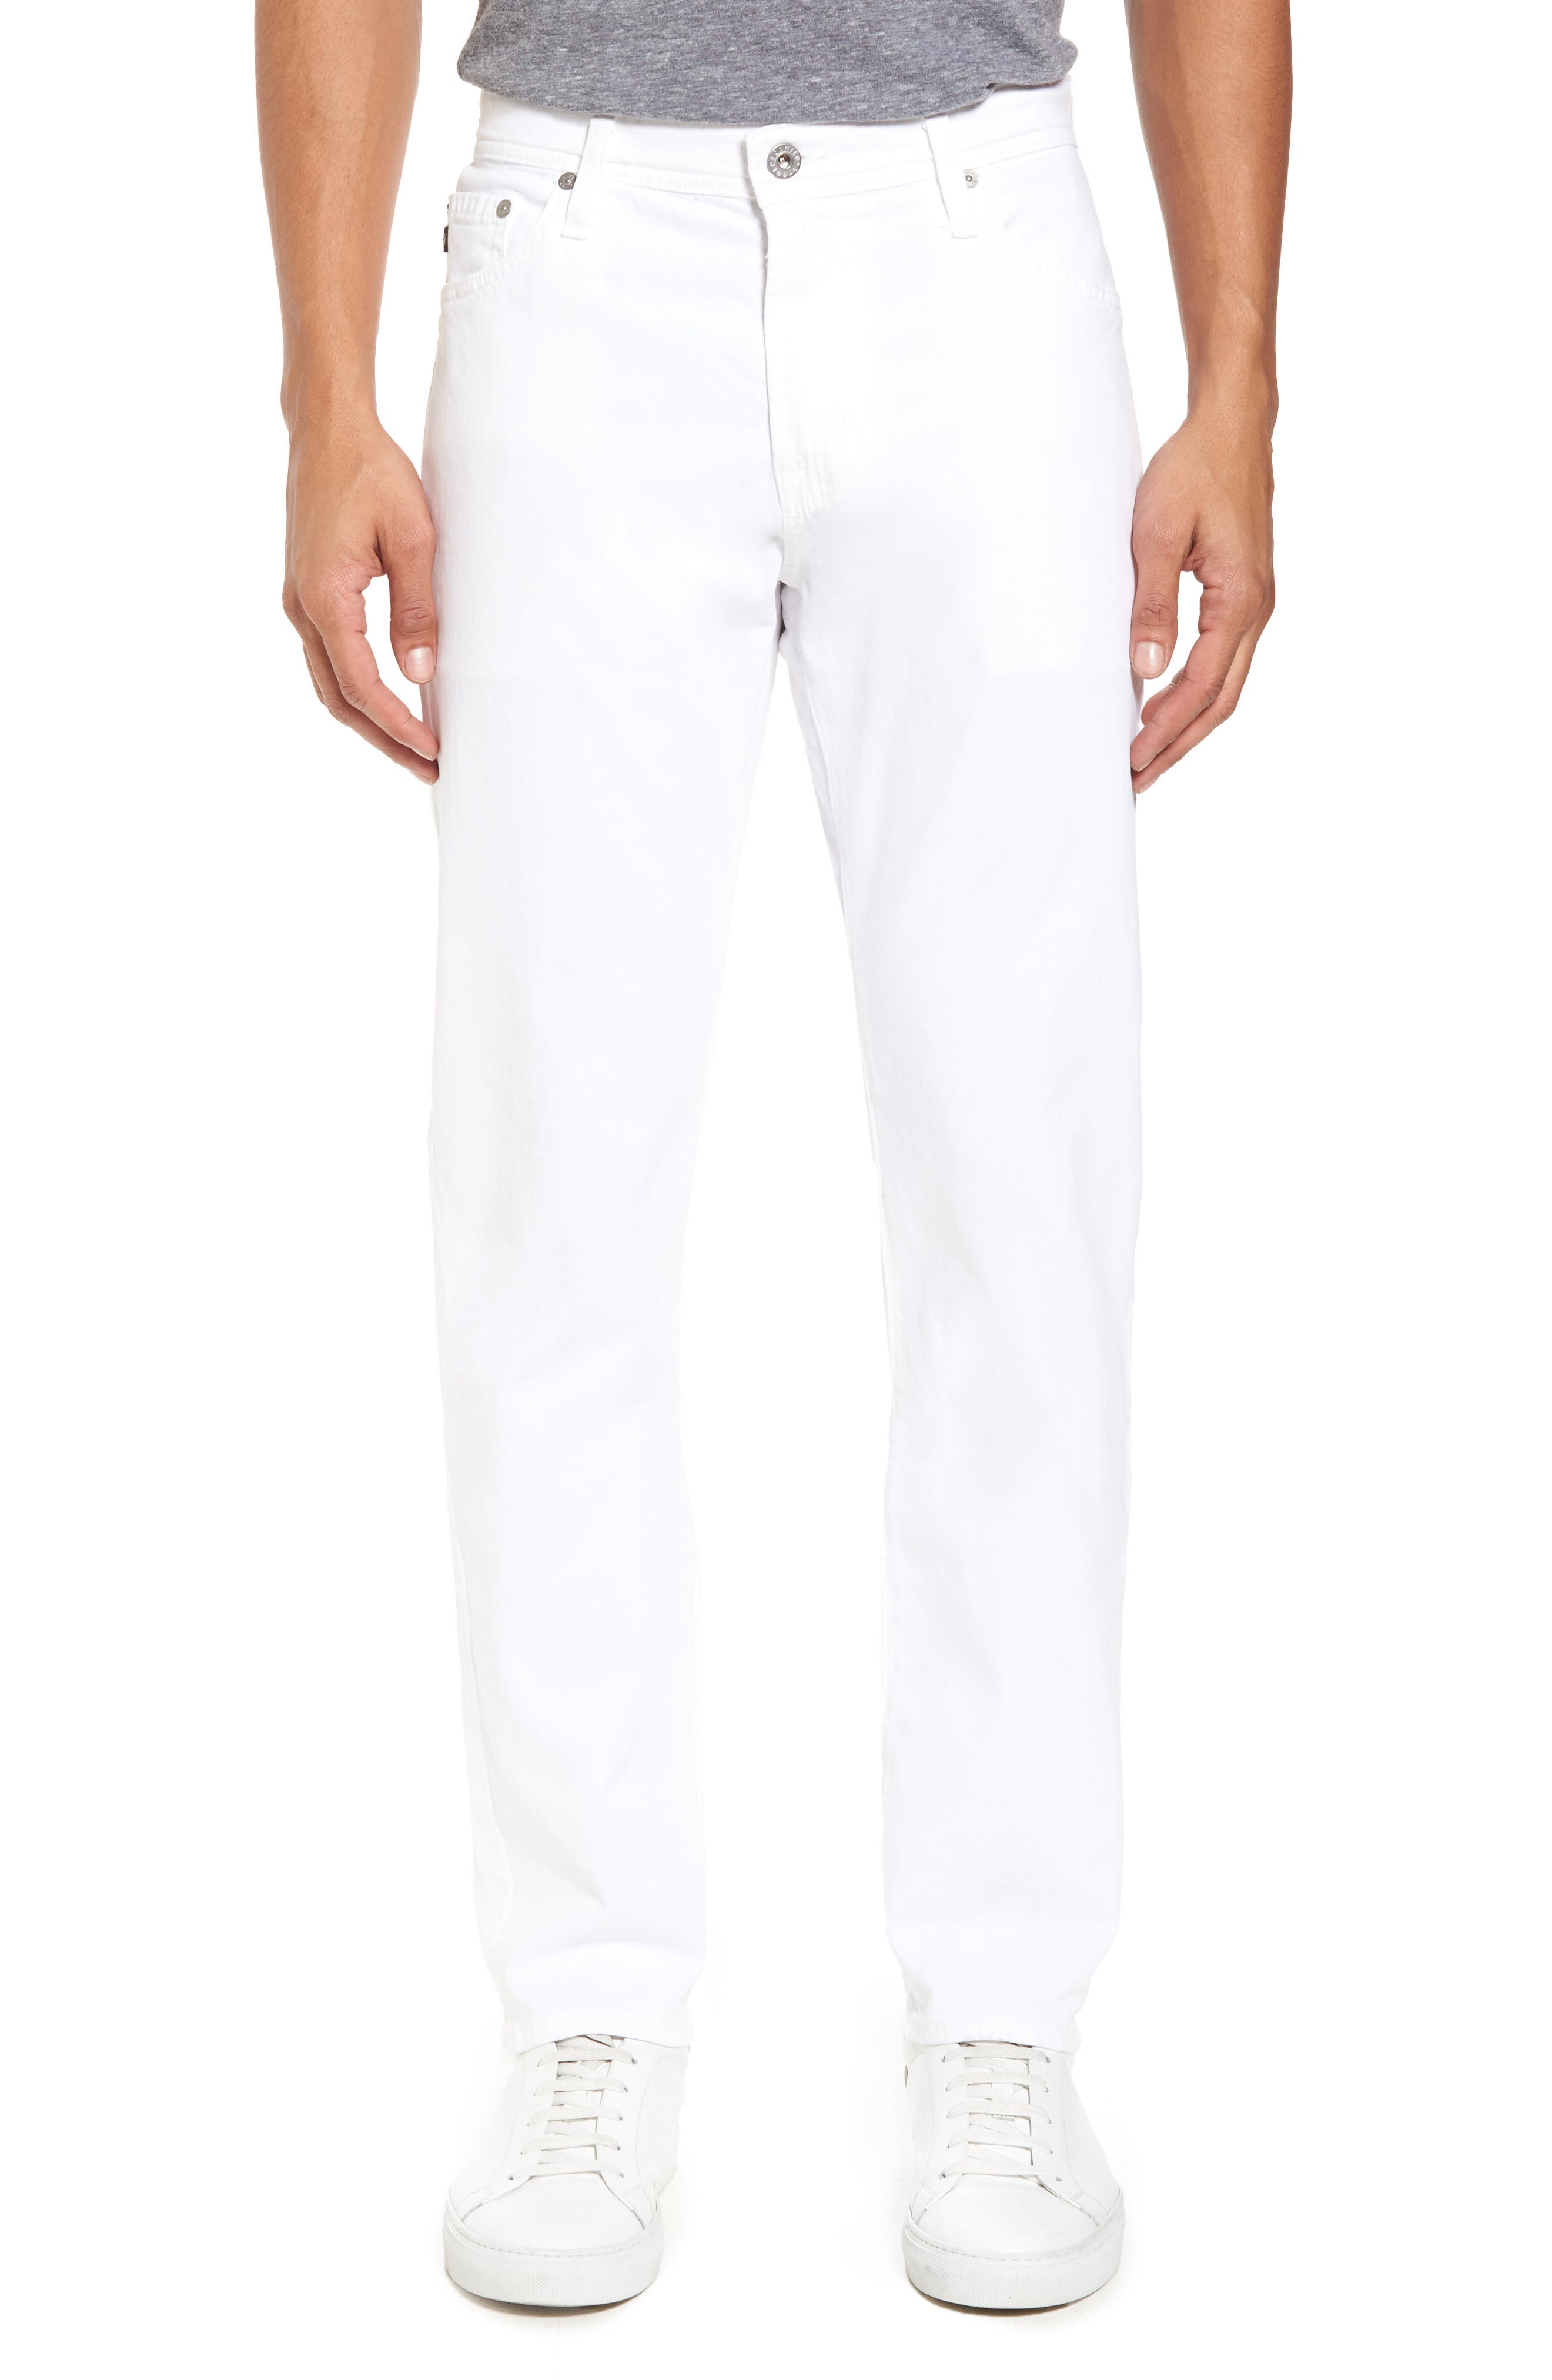 AG Adriano Goldschmied Mens The Everett Slim Straight Sud Pant 